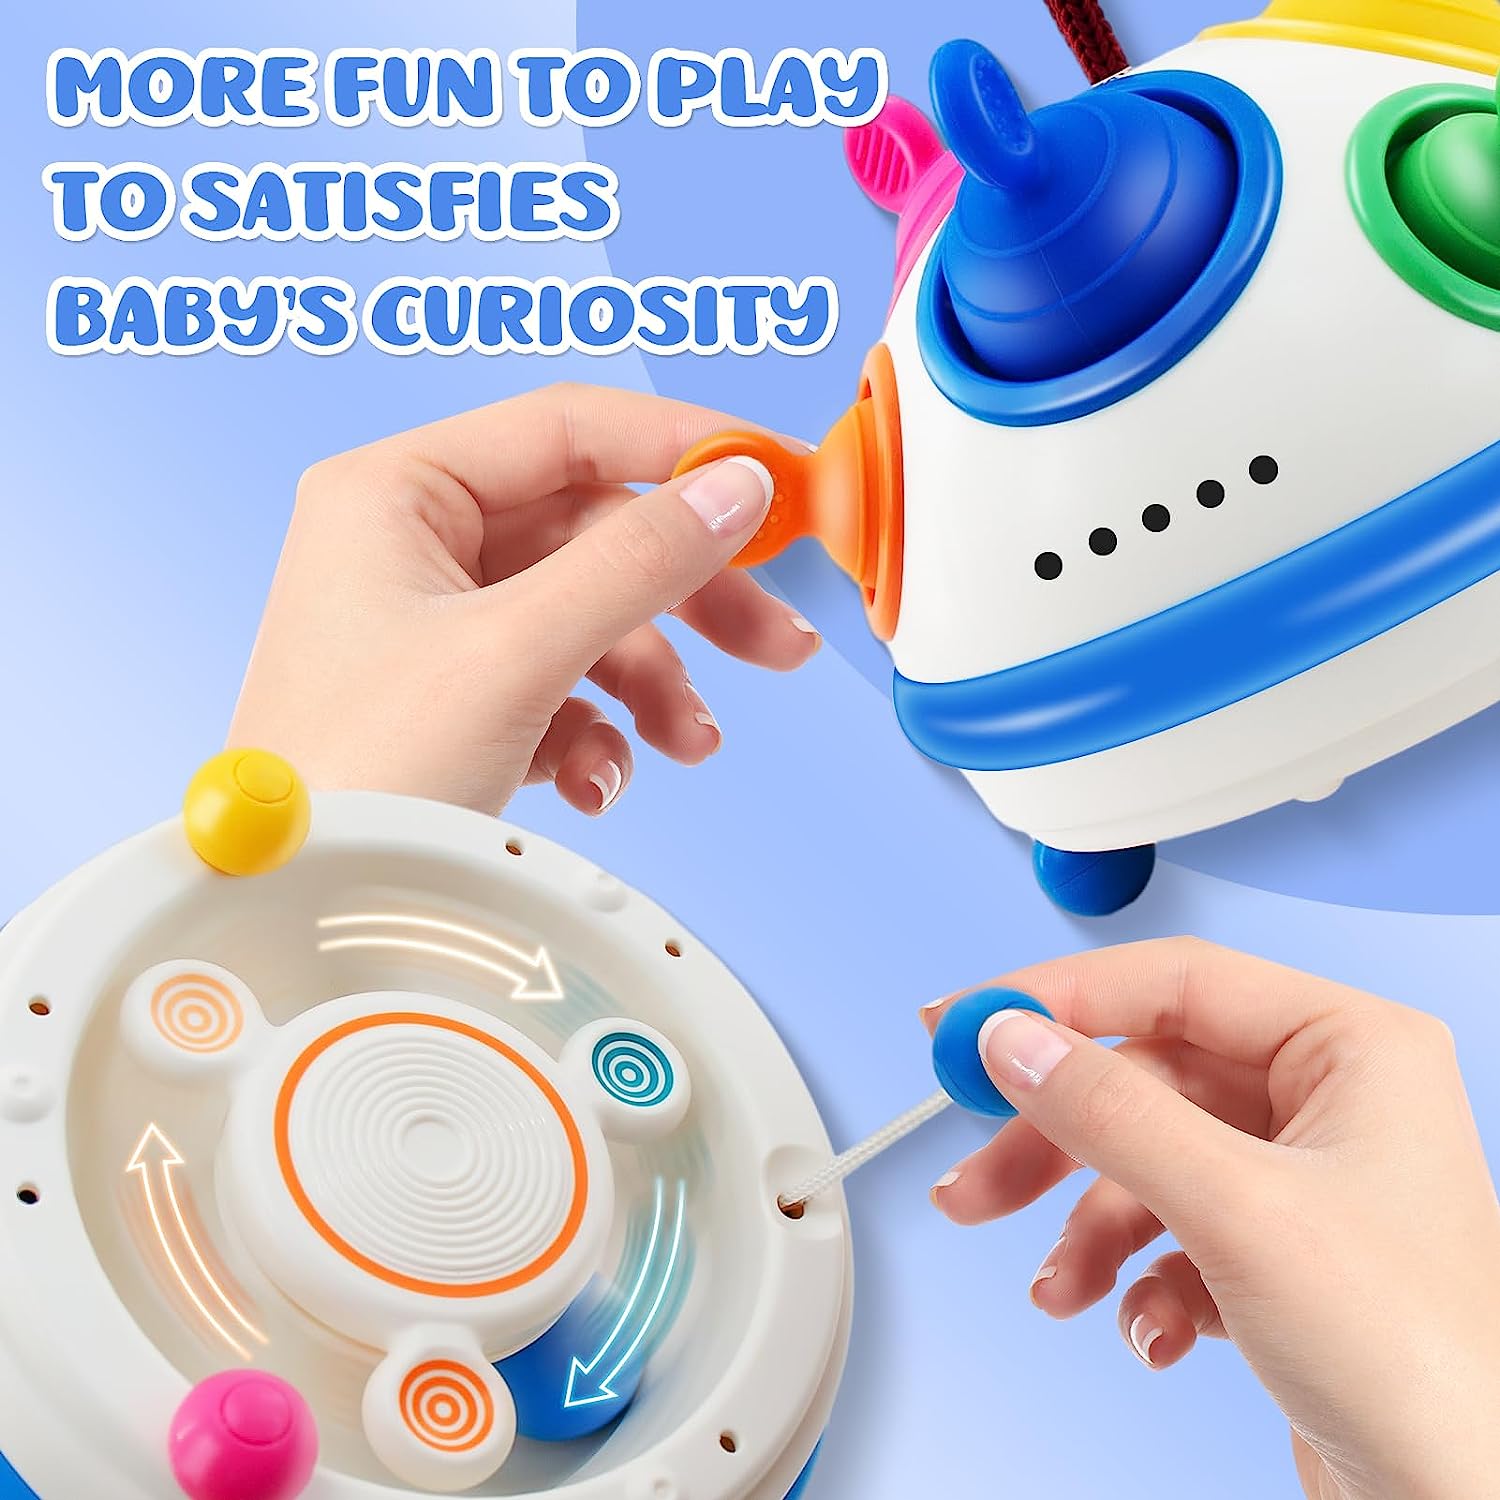 Baby Toys for 1 Year Old-Sensory Toys for Babies 12 M+ Food Grade Silicone Pull Activity Toy with Hand Spinner Toys for 1 Year Old Developmental Toys First Birthday Gift for Boys Girls